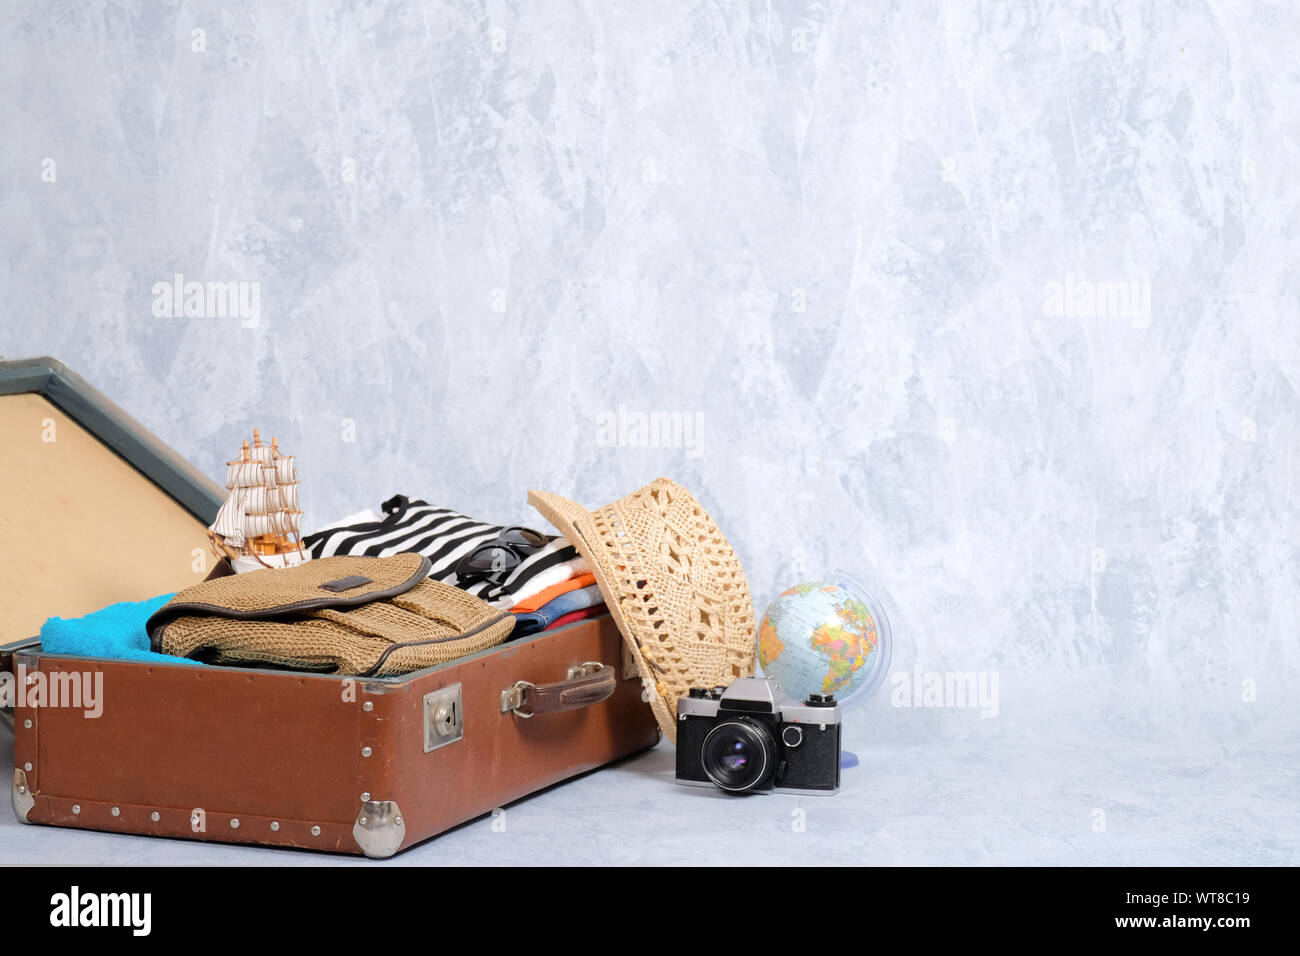 Full travel suitcase on grey background, opened case with travel clothing, accessories. Banner mockup with copy space. Travel or tourism, vacation, ho Stock Photo